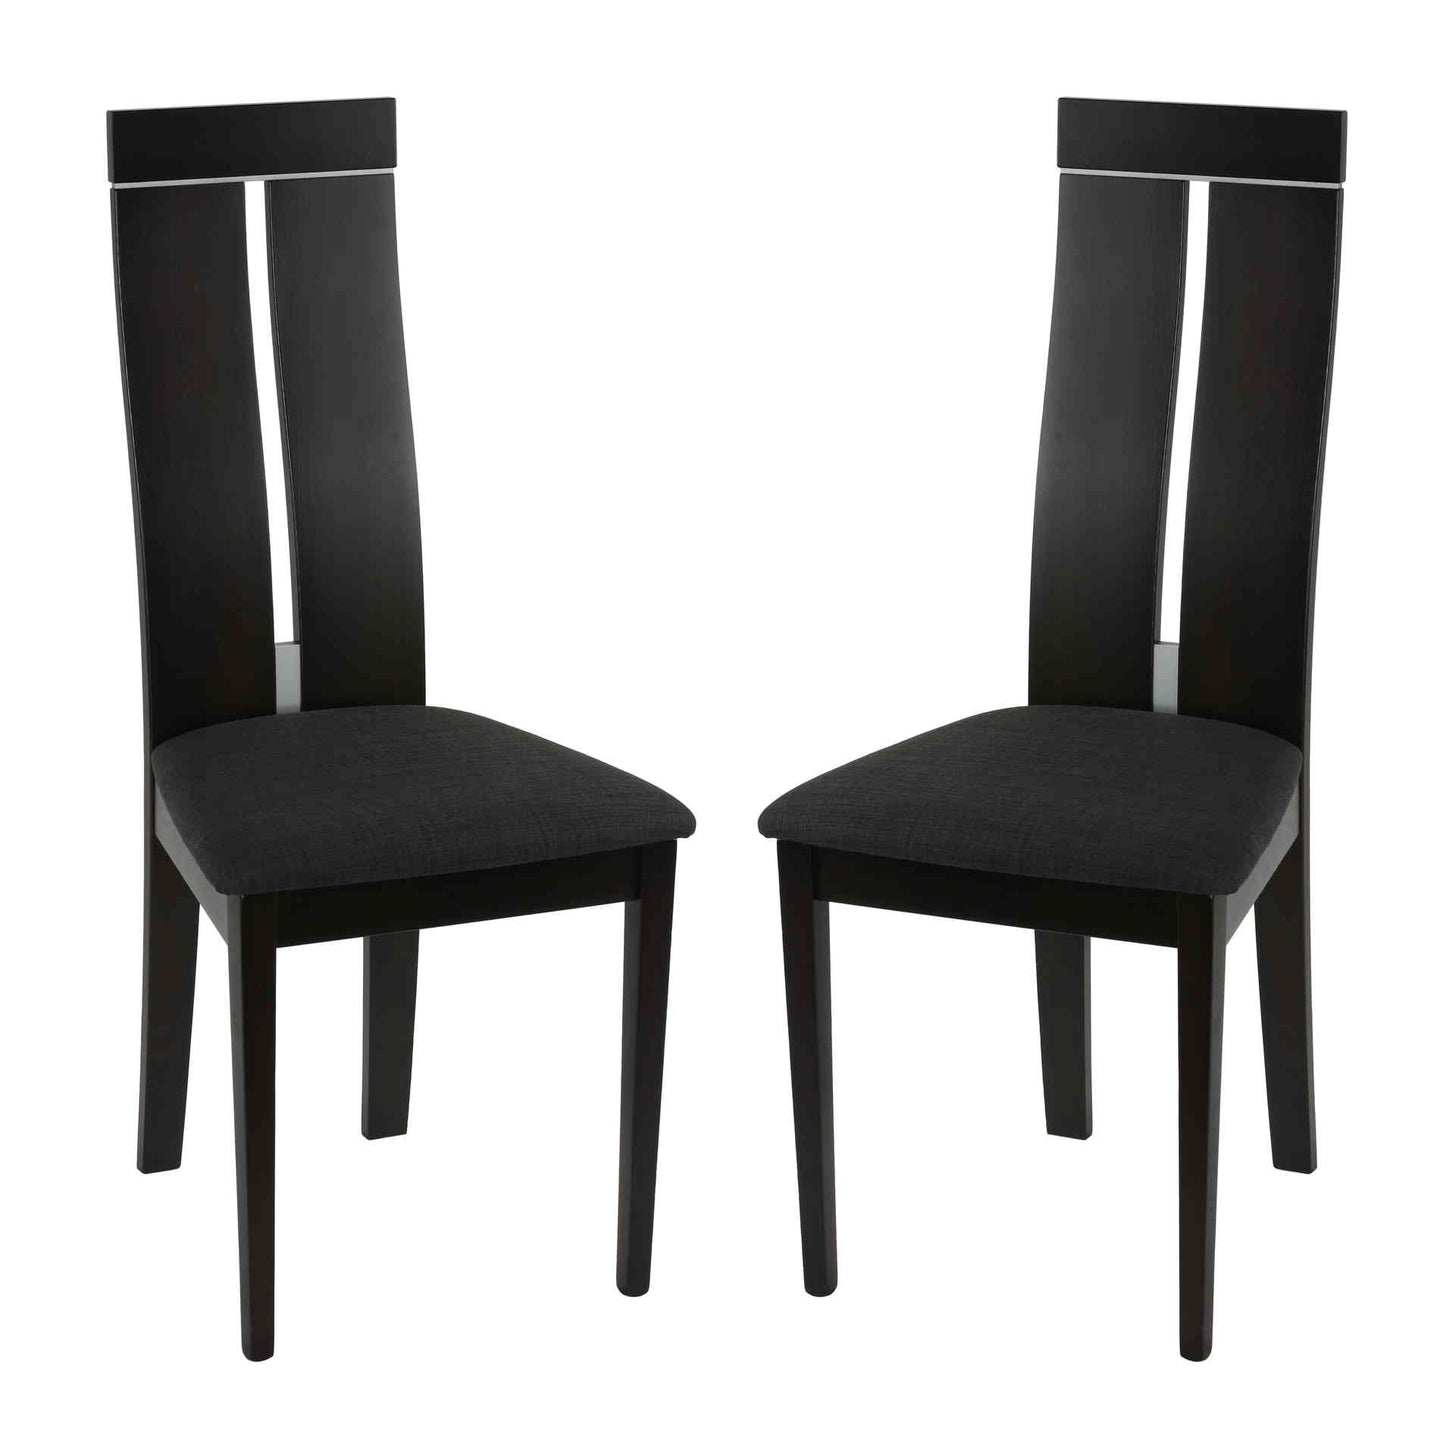 Cortesi Home Inca Dining Chair in Charcoal Fabric, Cappuccino Finish (Set of 2)